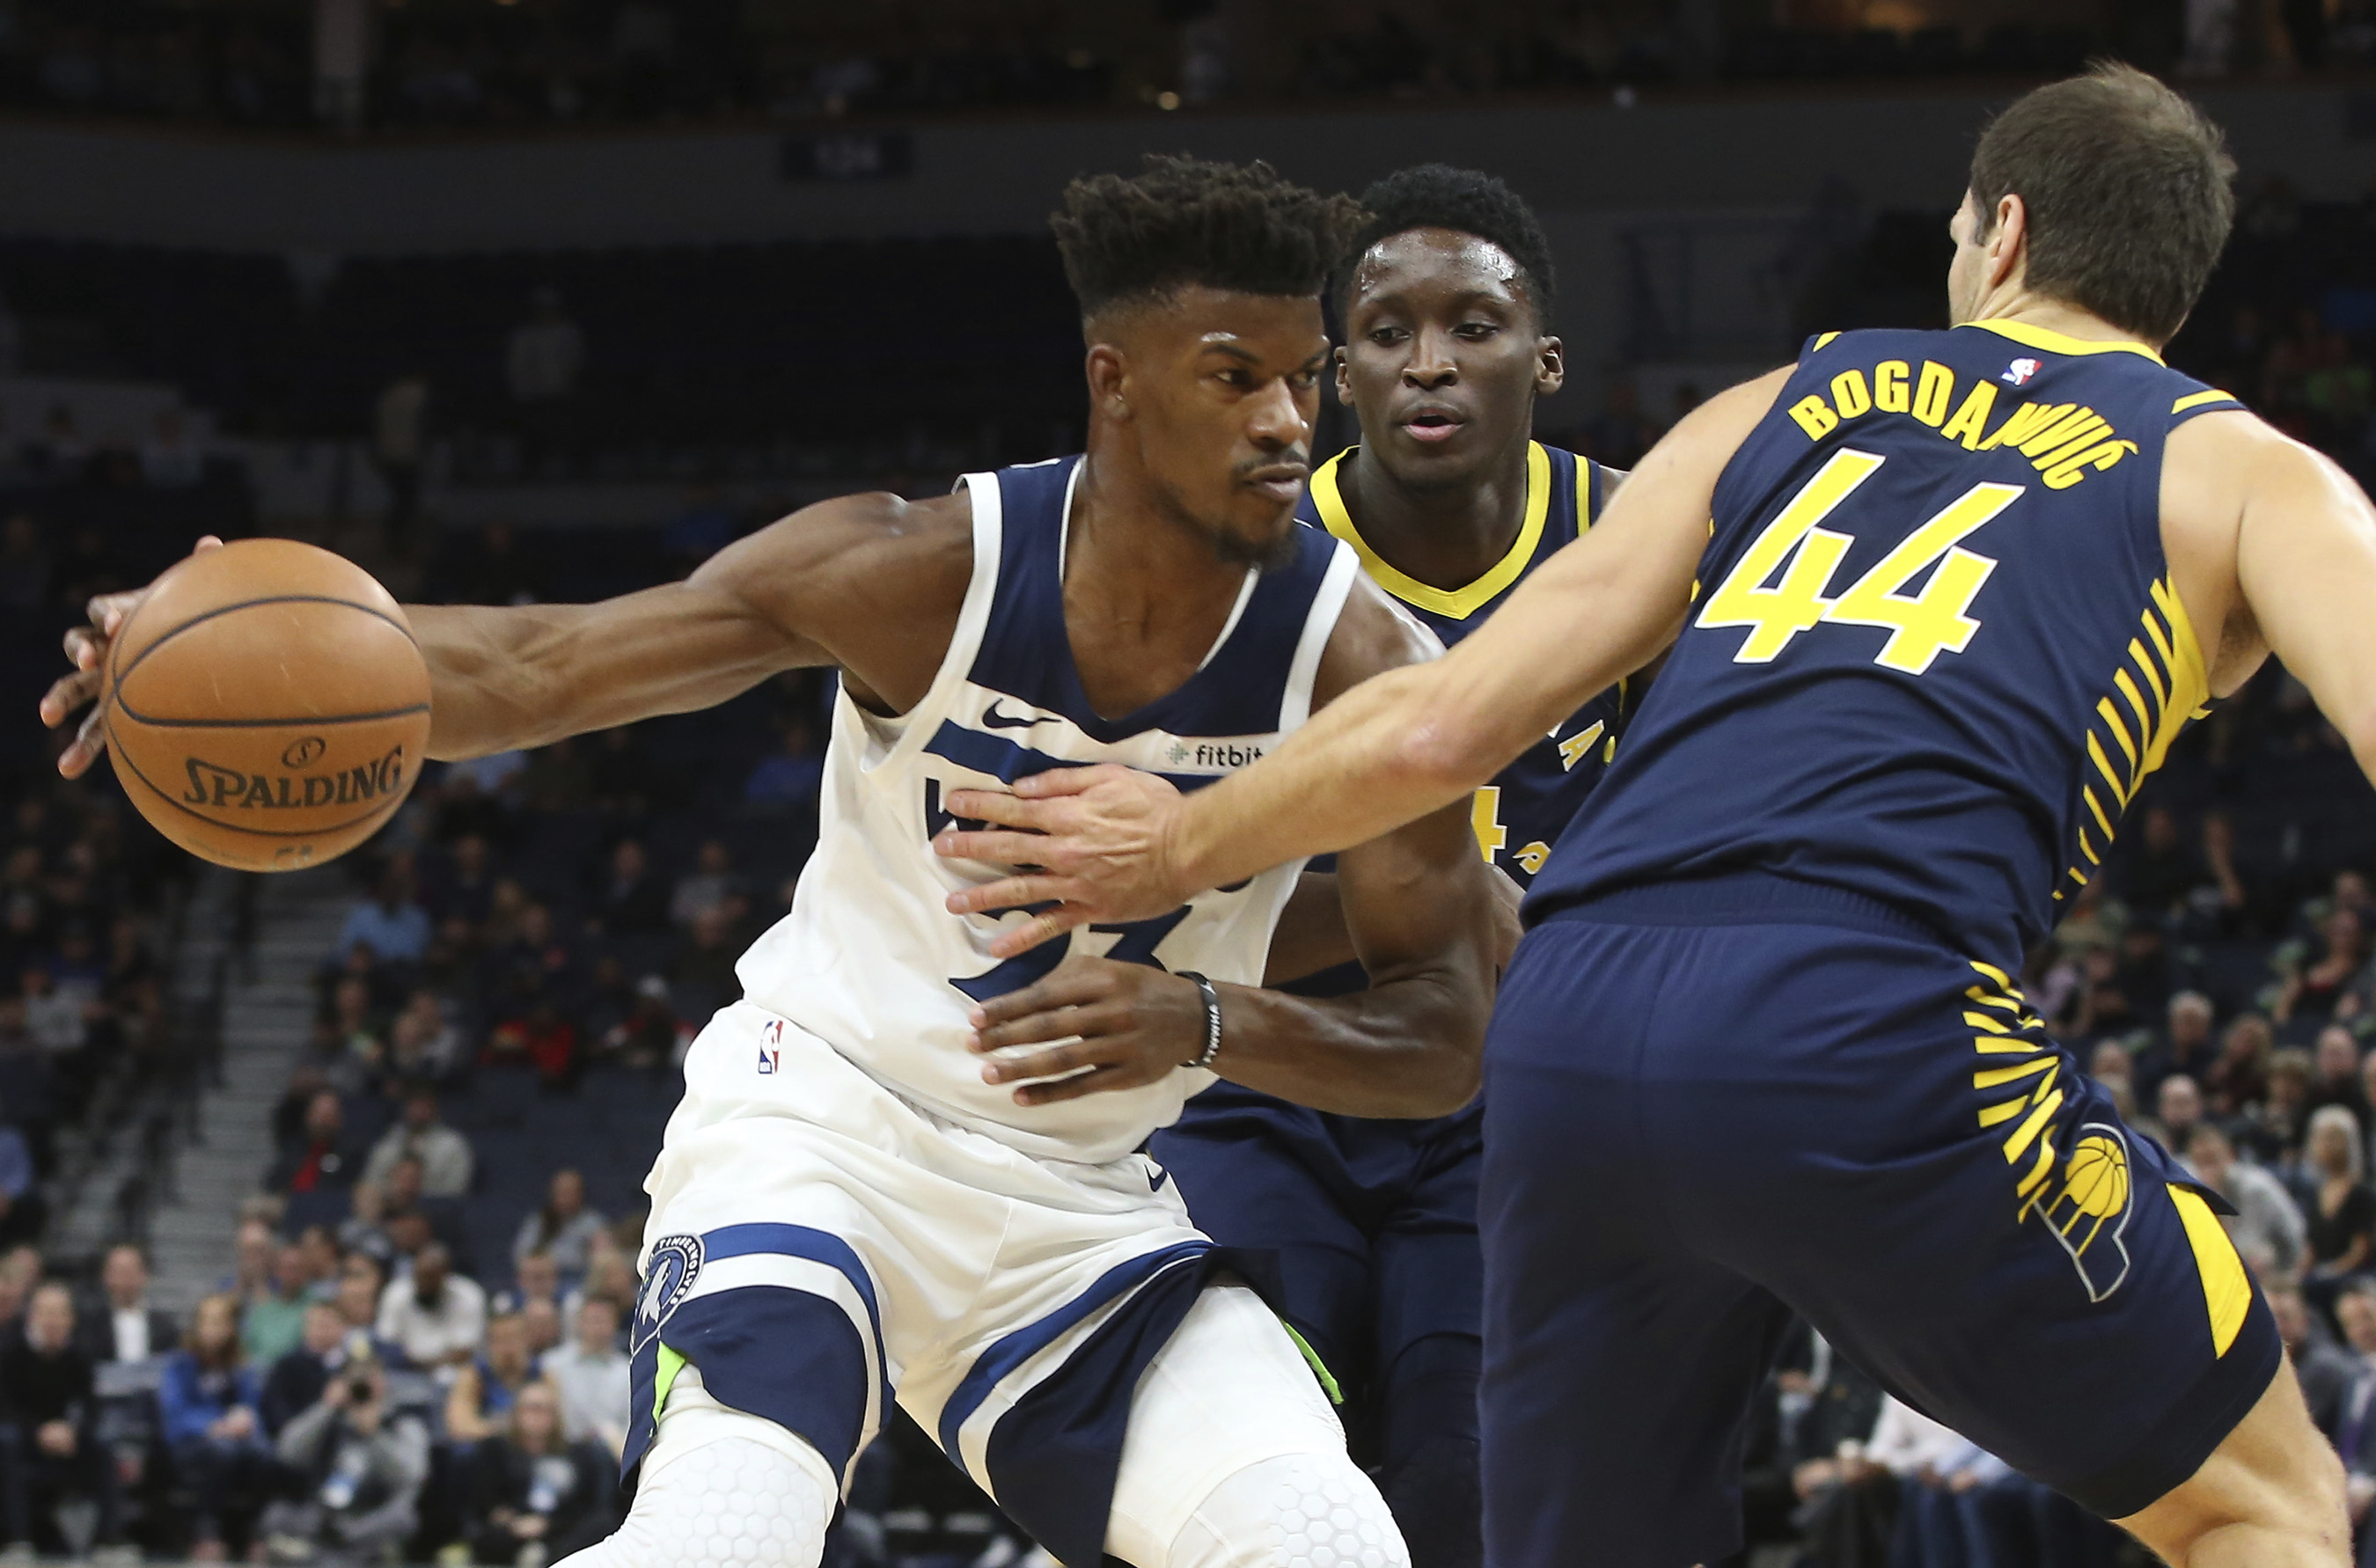 Wolves clamp down on defense in 101-91 win over Pacers